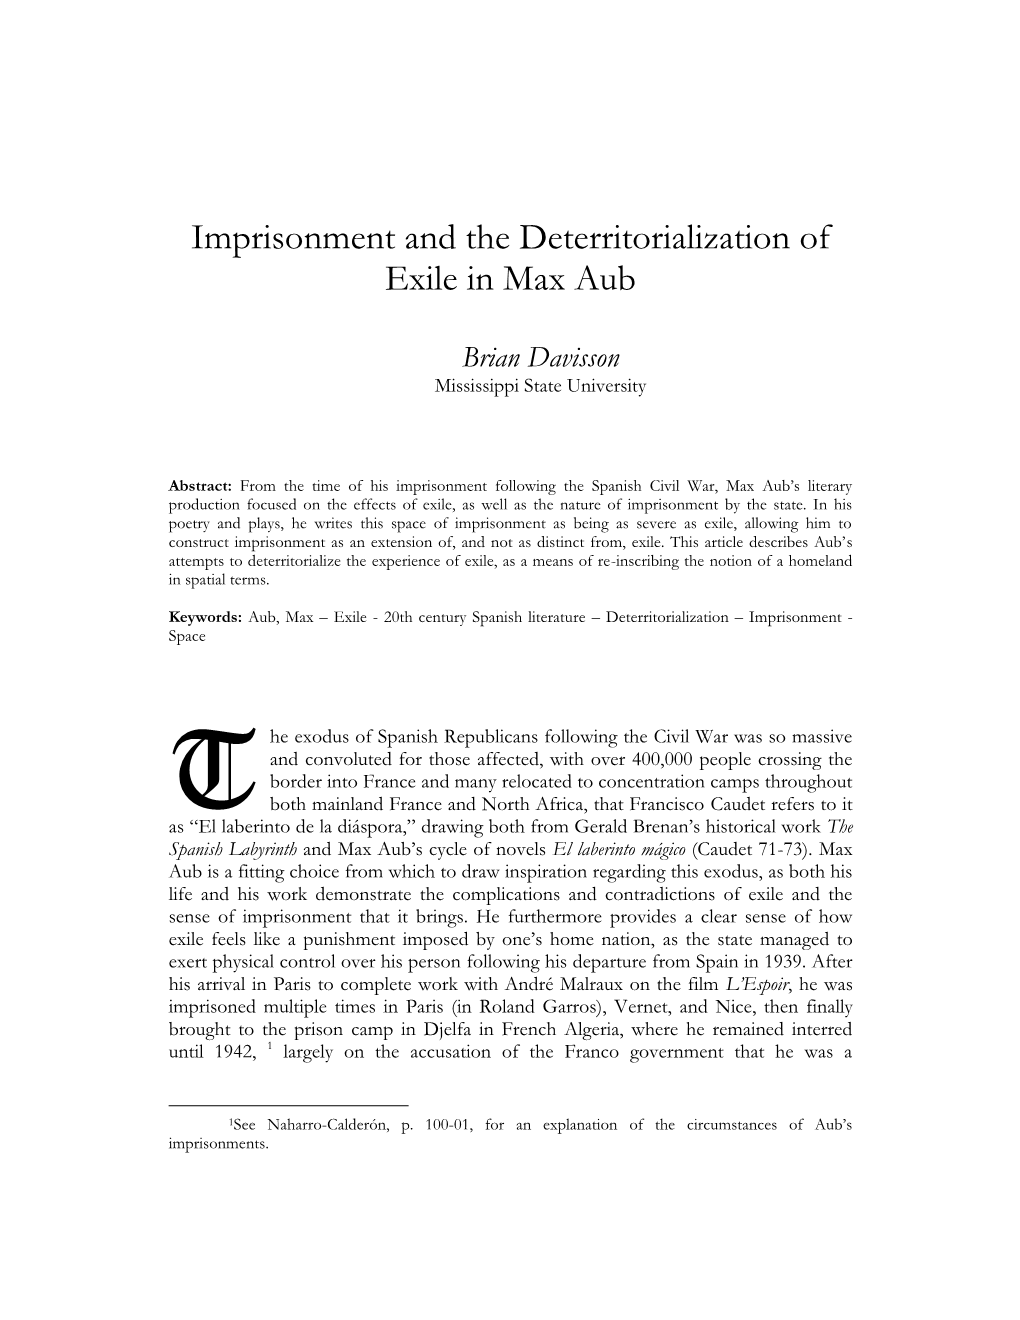 Imprisonment and the Deterritorialization of Exile in Max Aub